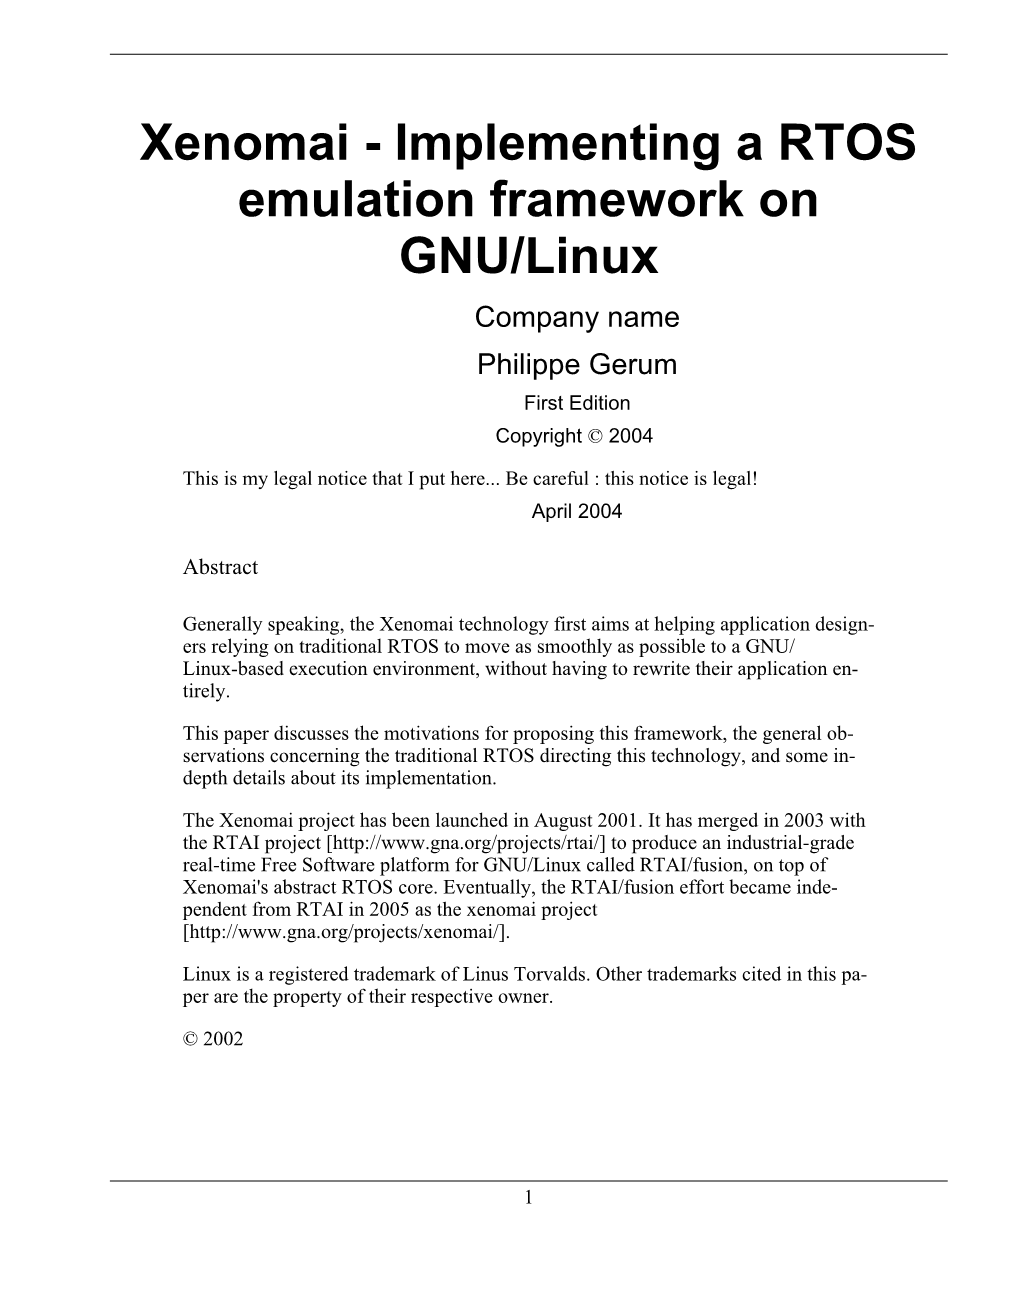 Xenomai - Implementing a RTOS Emulation Framework on GNU/Linux Company Name Philippe Gerum First Edition Copyright © 2004